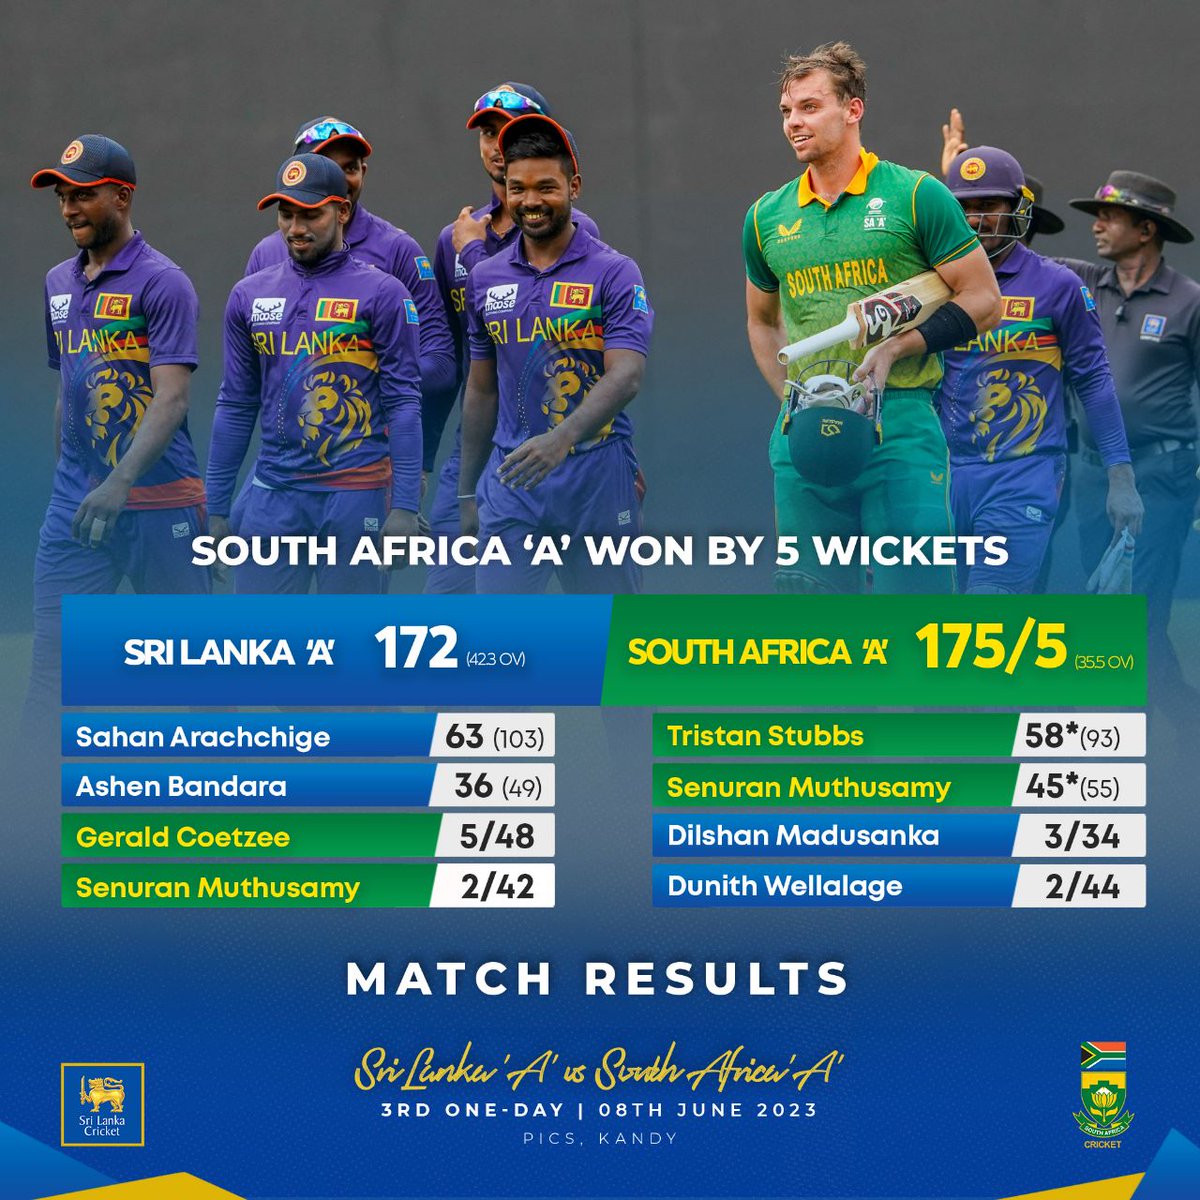 Heartbreak 💔 for Sri Lanka 'A' as they lose the 3rd One Day match by 5 wickets, handing the series victory to South Africa 'A' 🏏😔

#SLvSA #SLATeam